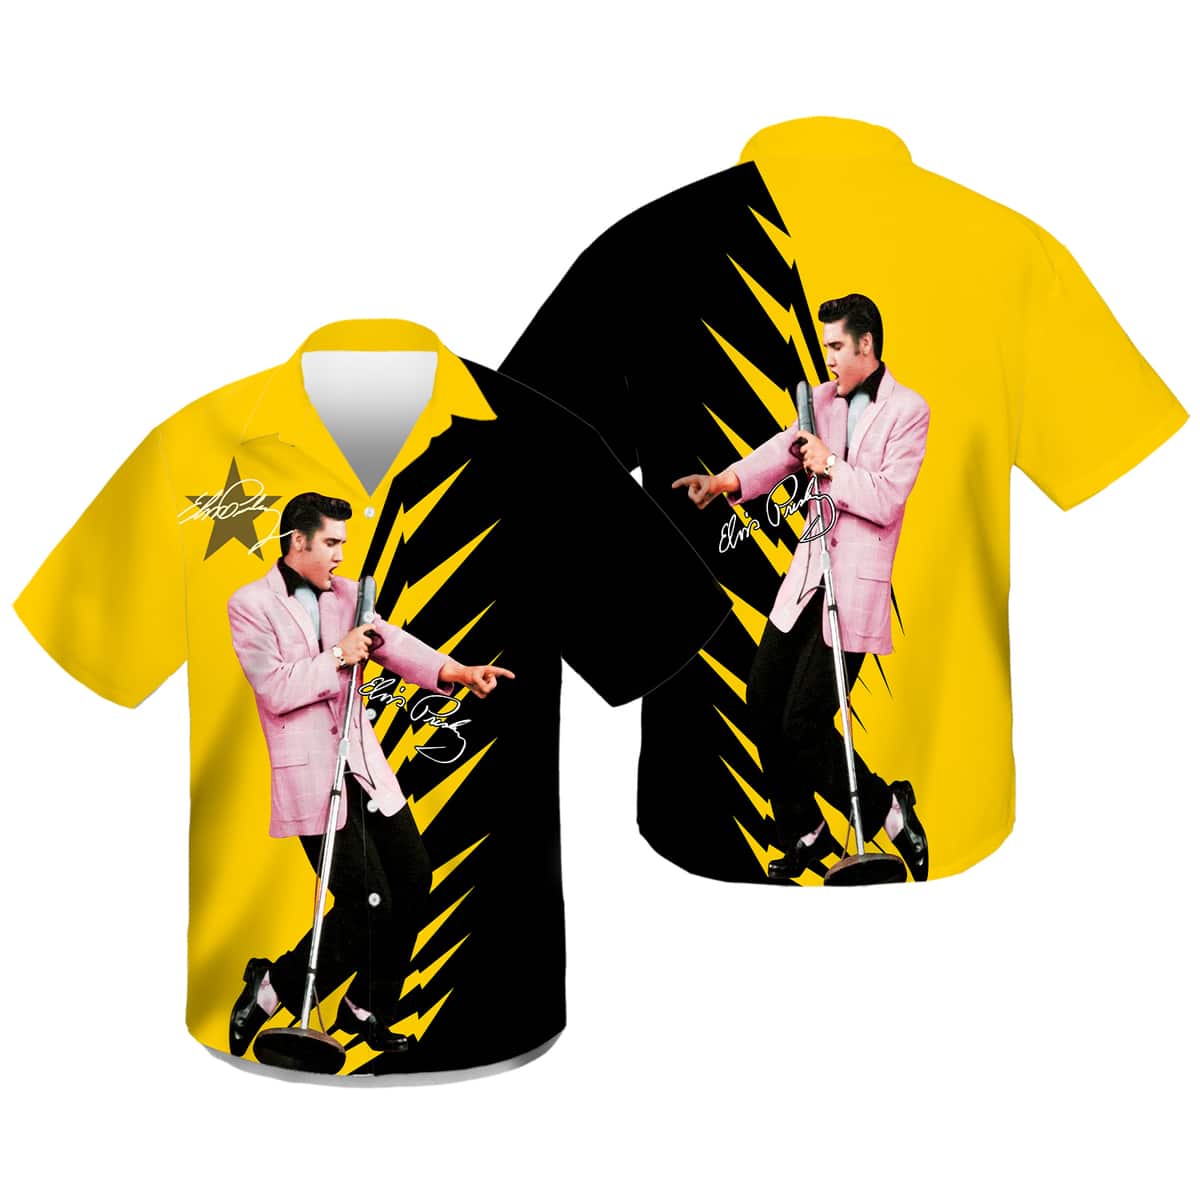 The King Of Rock And Roll Elvis Presley Hawaiian Shirt Summer Gift For Music Lovers